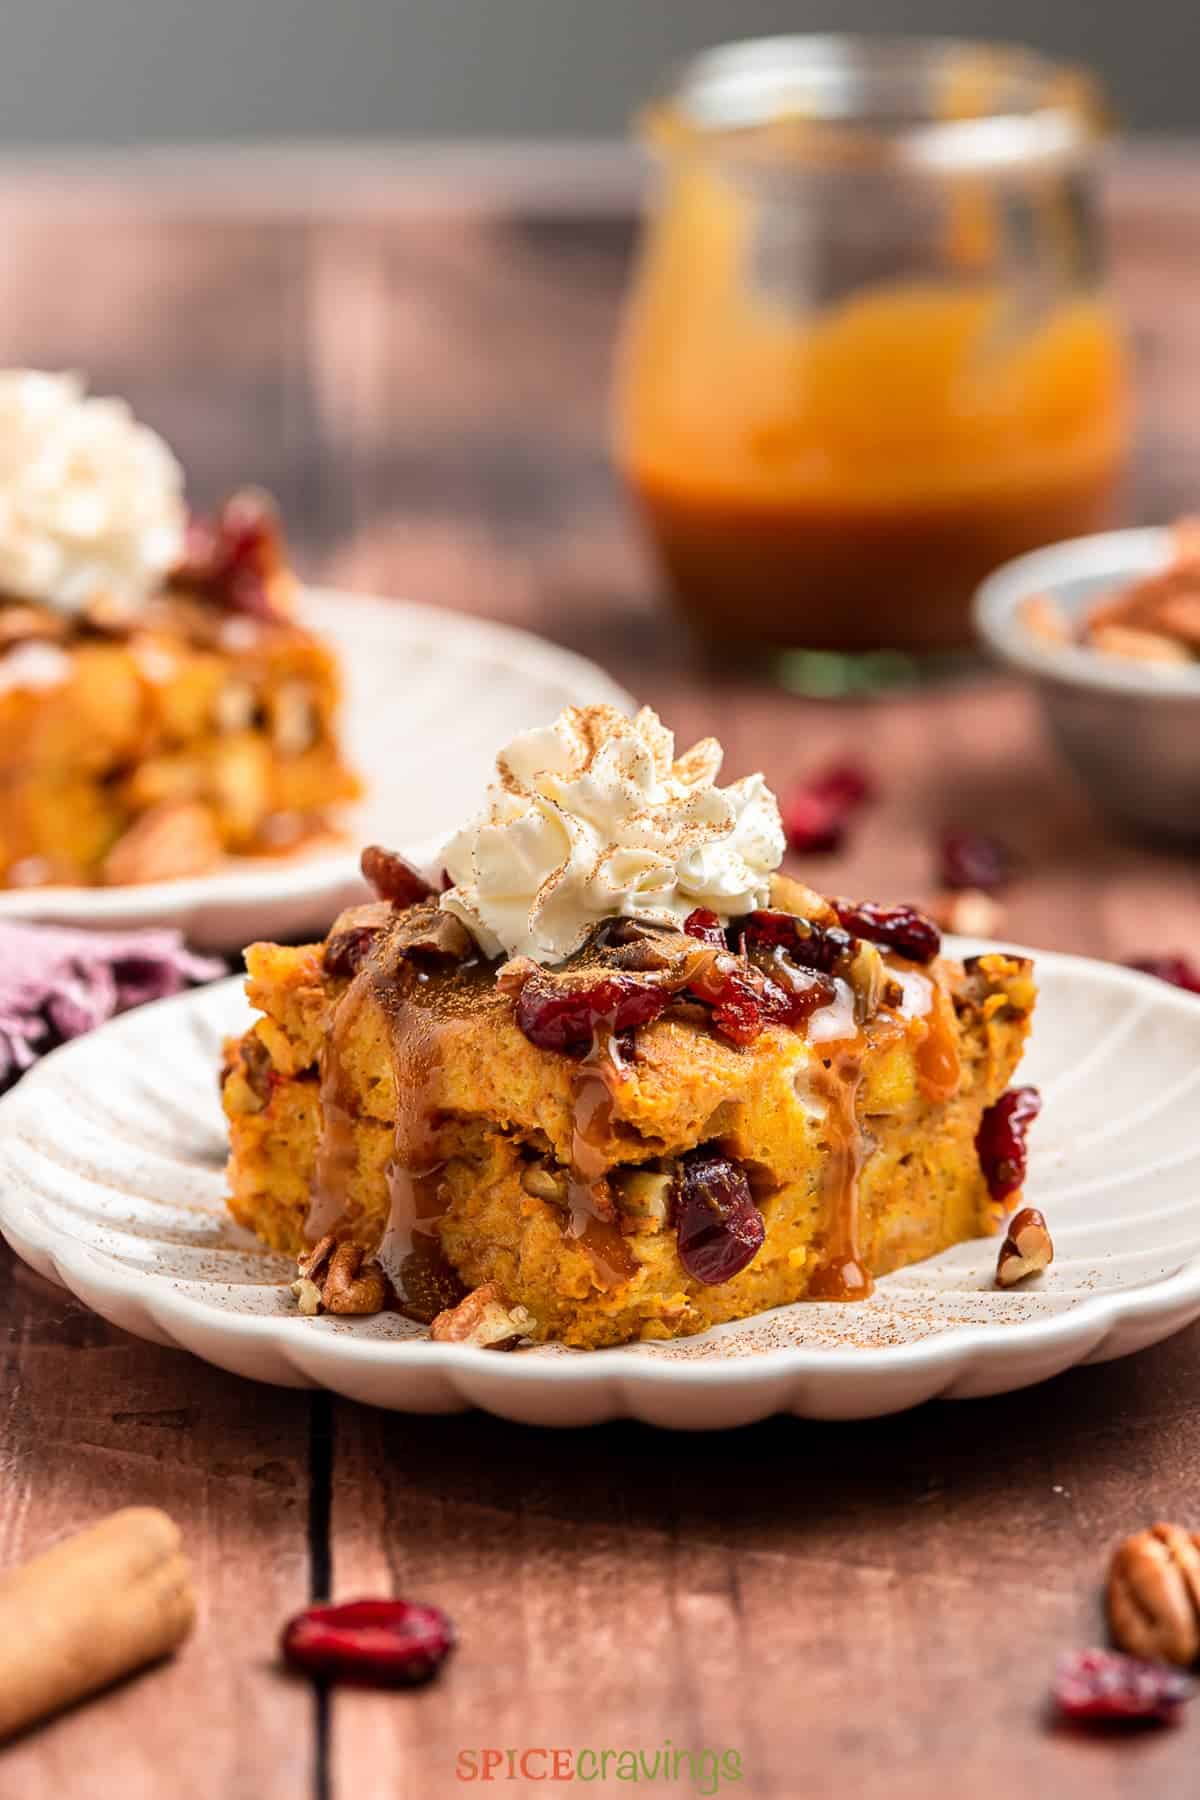 A front shot of a slice of pumpkin bread pudding on a plate.